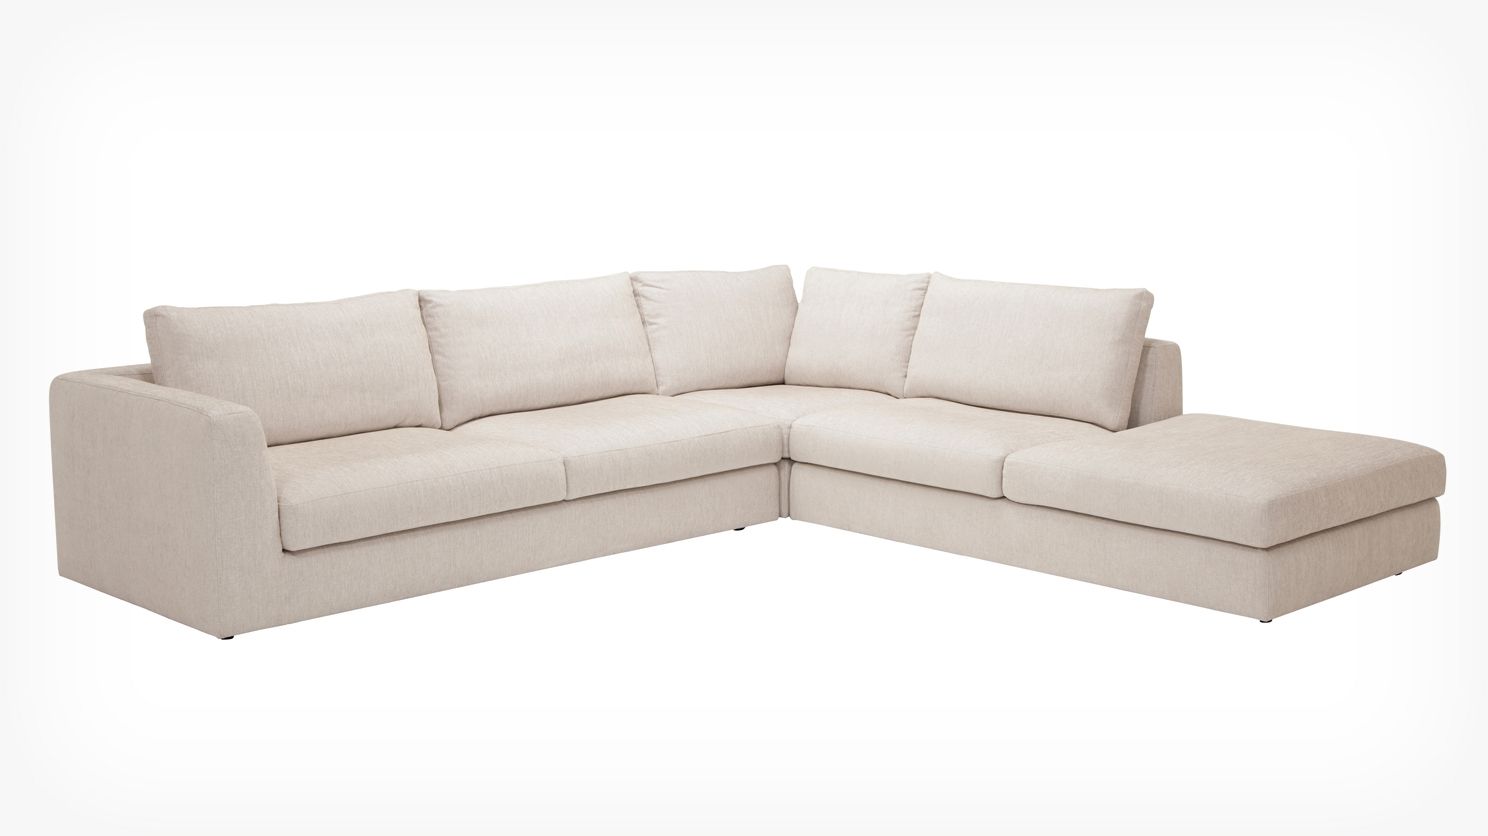 Eq3 Cello 3 Piece Sectional Sofa With Backless Chaise Fabric With Regard To Backless Chaise Sofa (View 15 of 15)